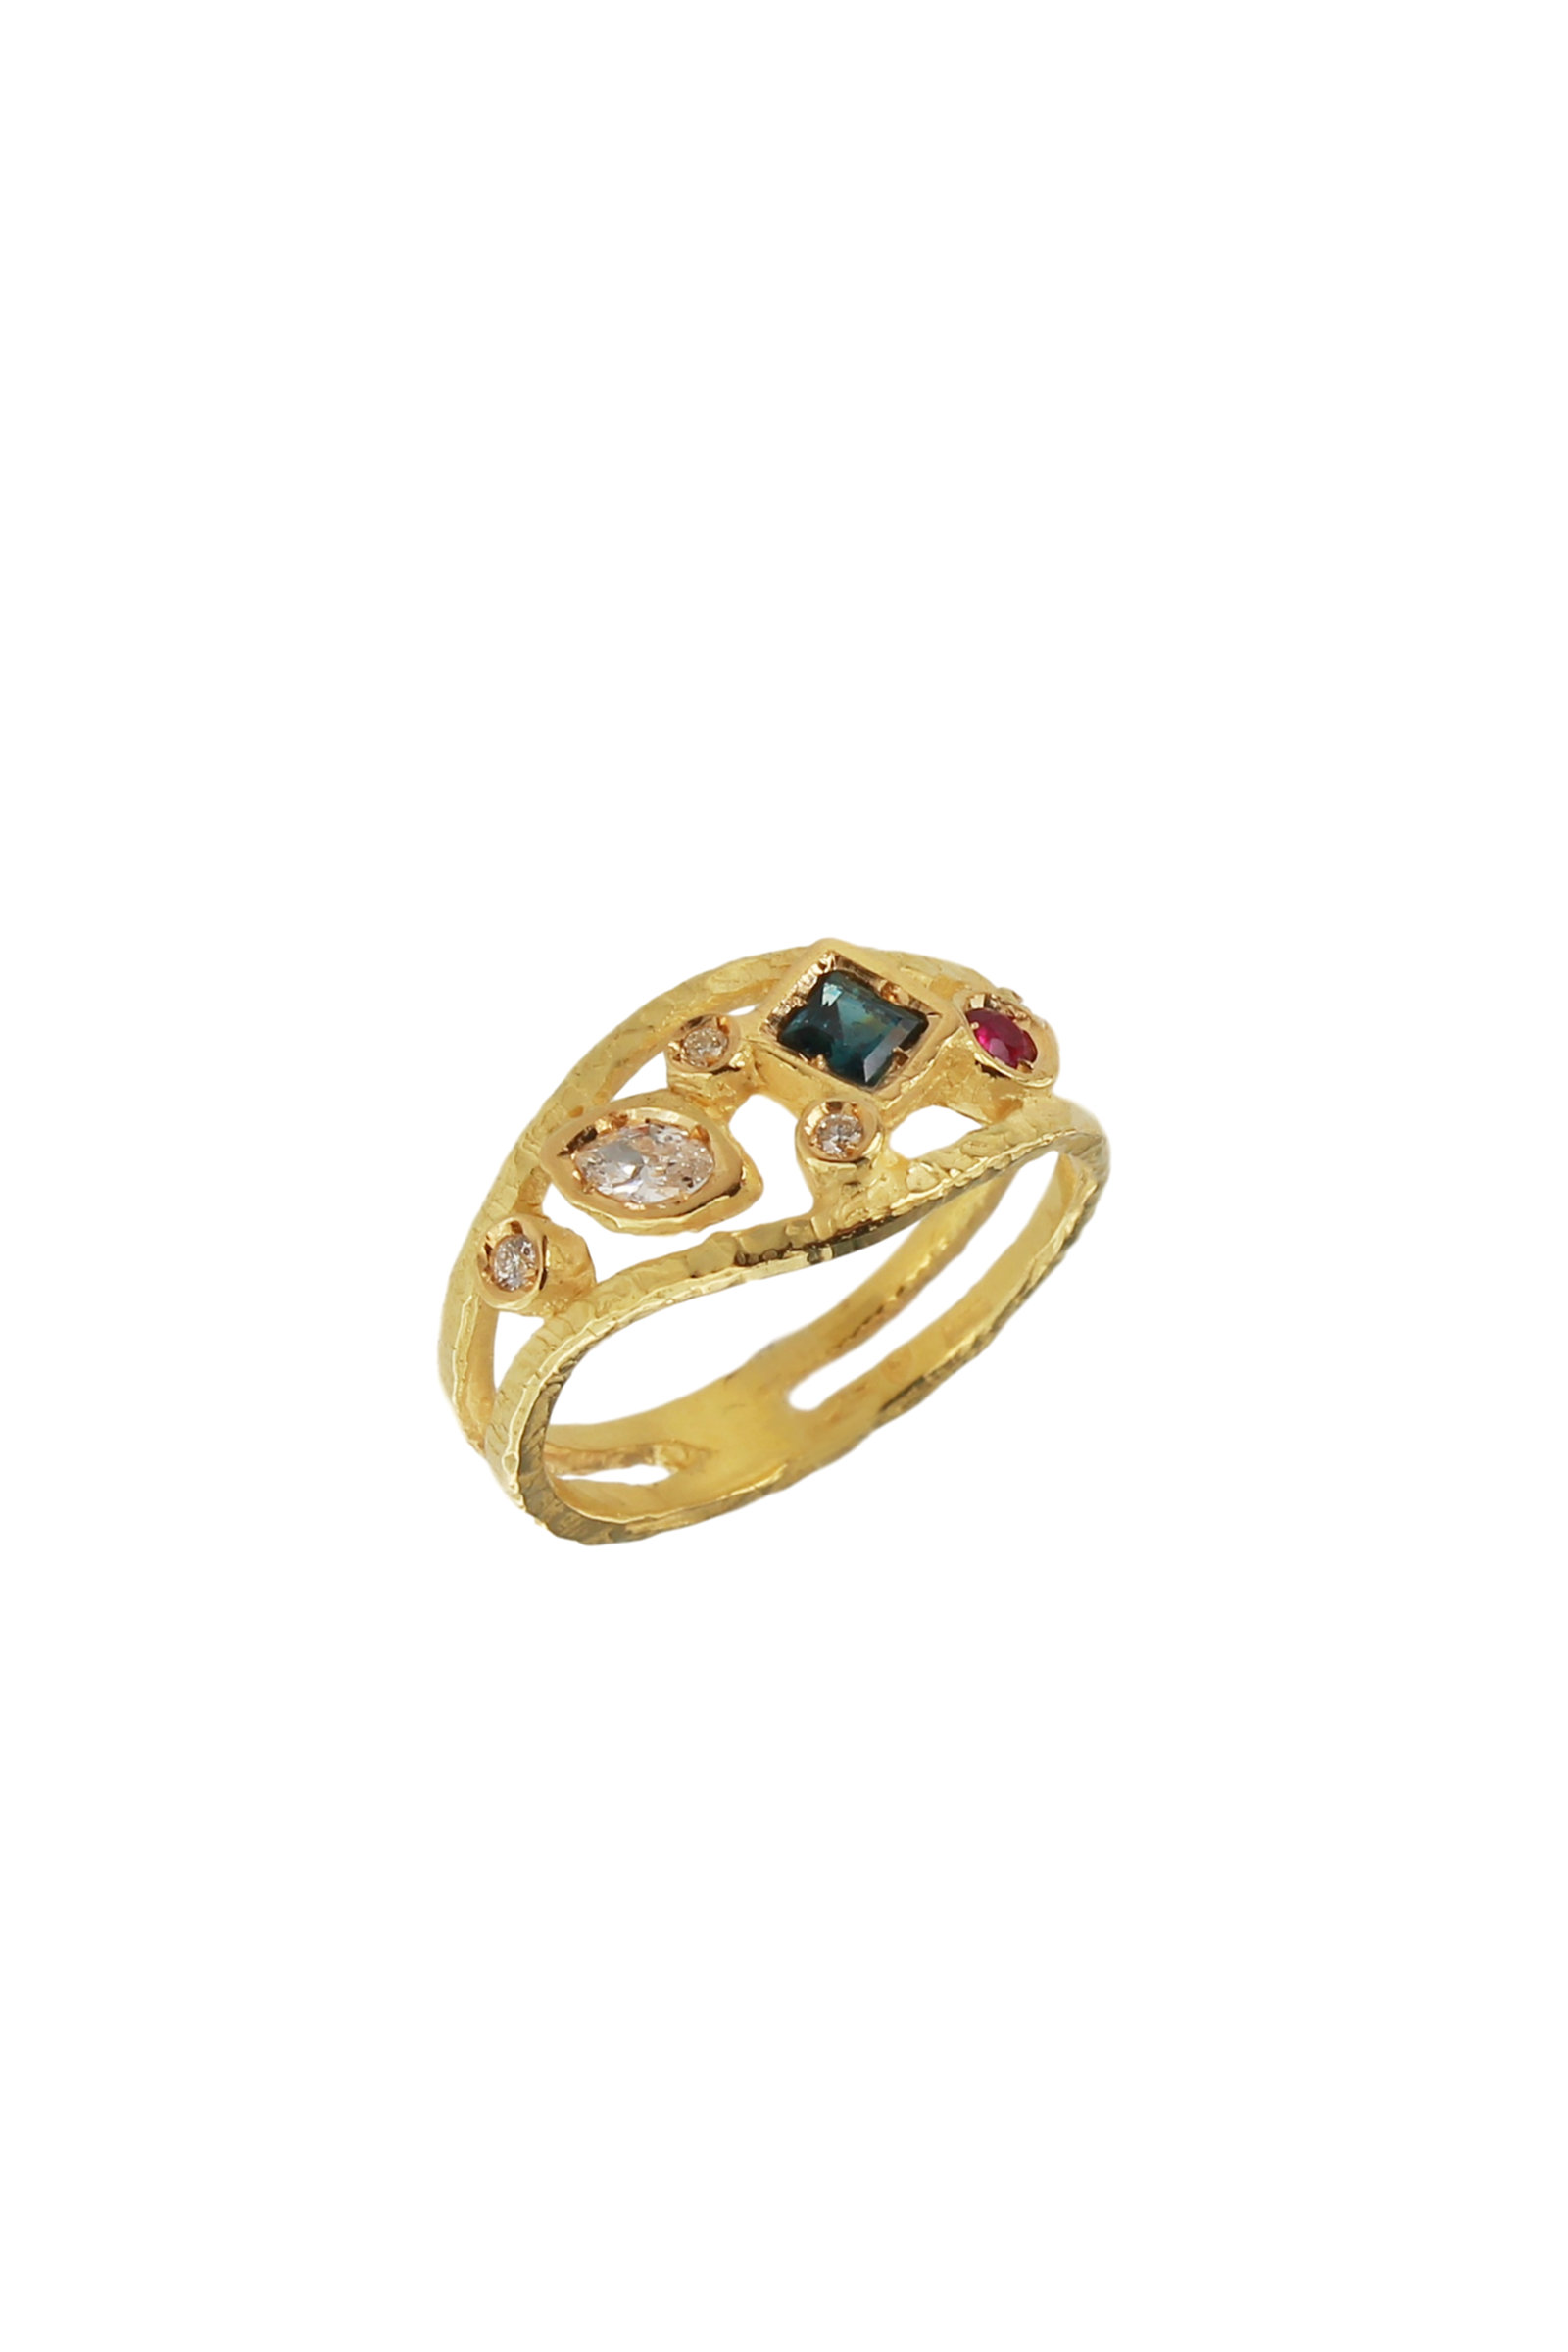 SE238B-18-Kt-Yellow-Gold-Ring-with-Ruby-Diamonds-and-Sapphire-1